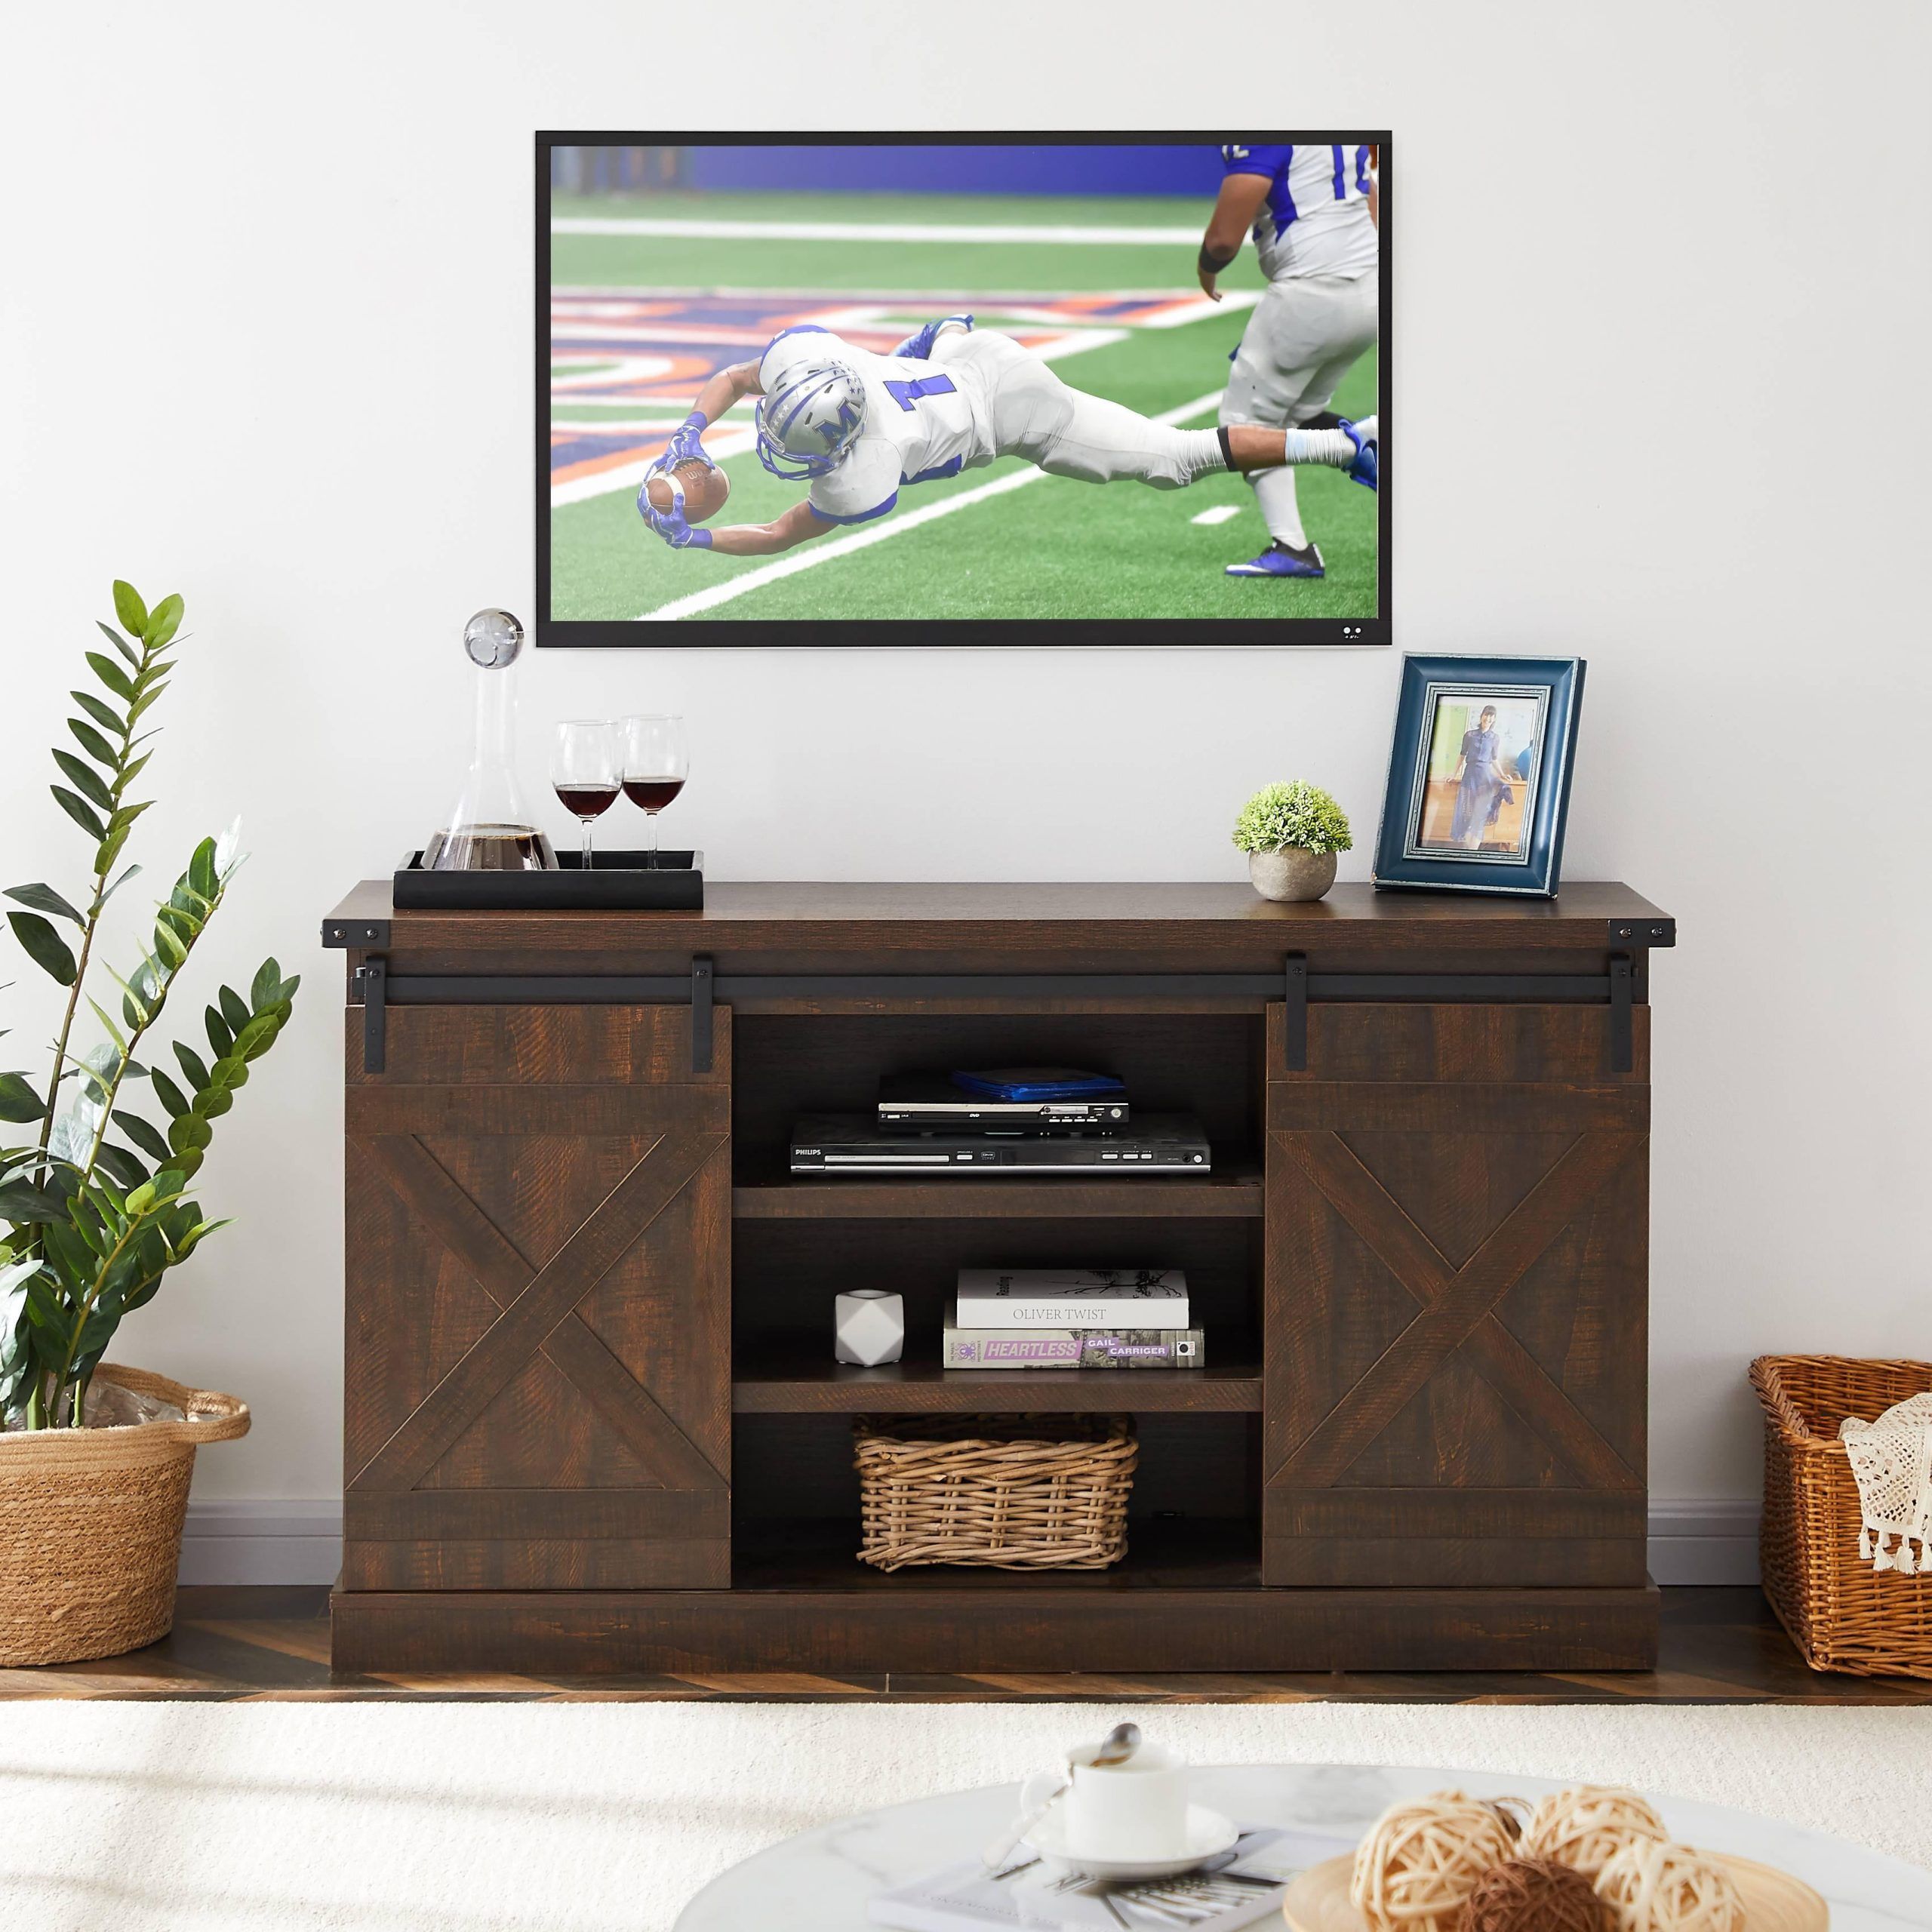 Sliding Barn Door Tv Cabinet With Storage Space And Shelf, Modern For Cafe Tv Stands With Storage (View 14 of 20)